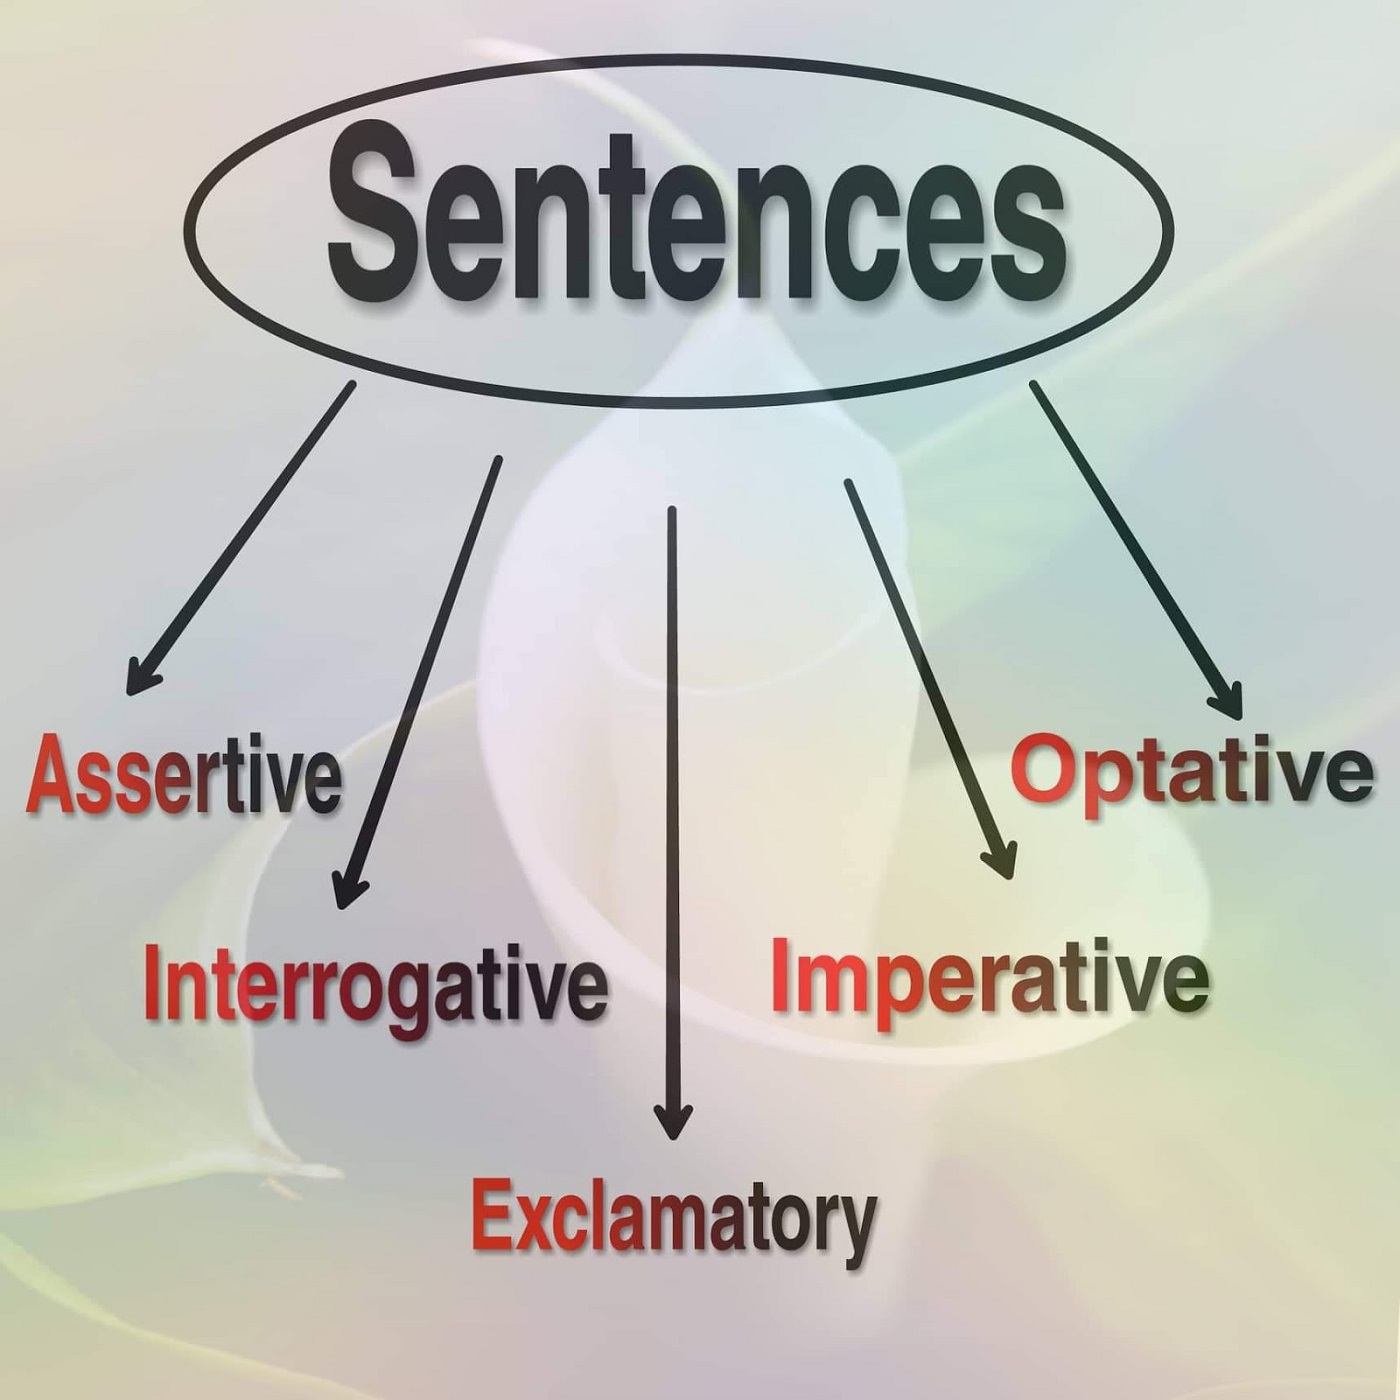 sentences-with-different-meaning-and-example-sentences-when-using-the-engl-english